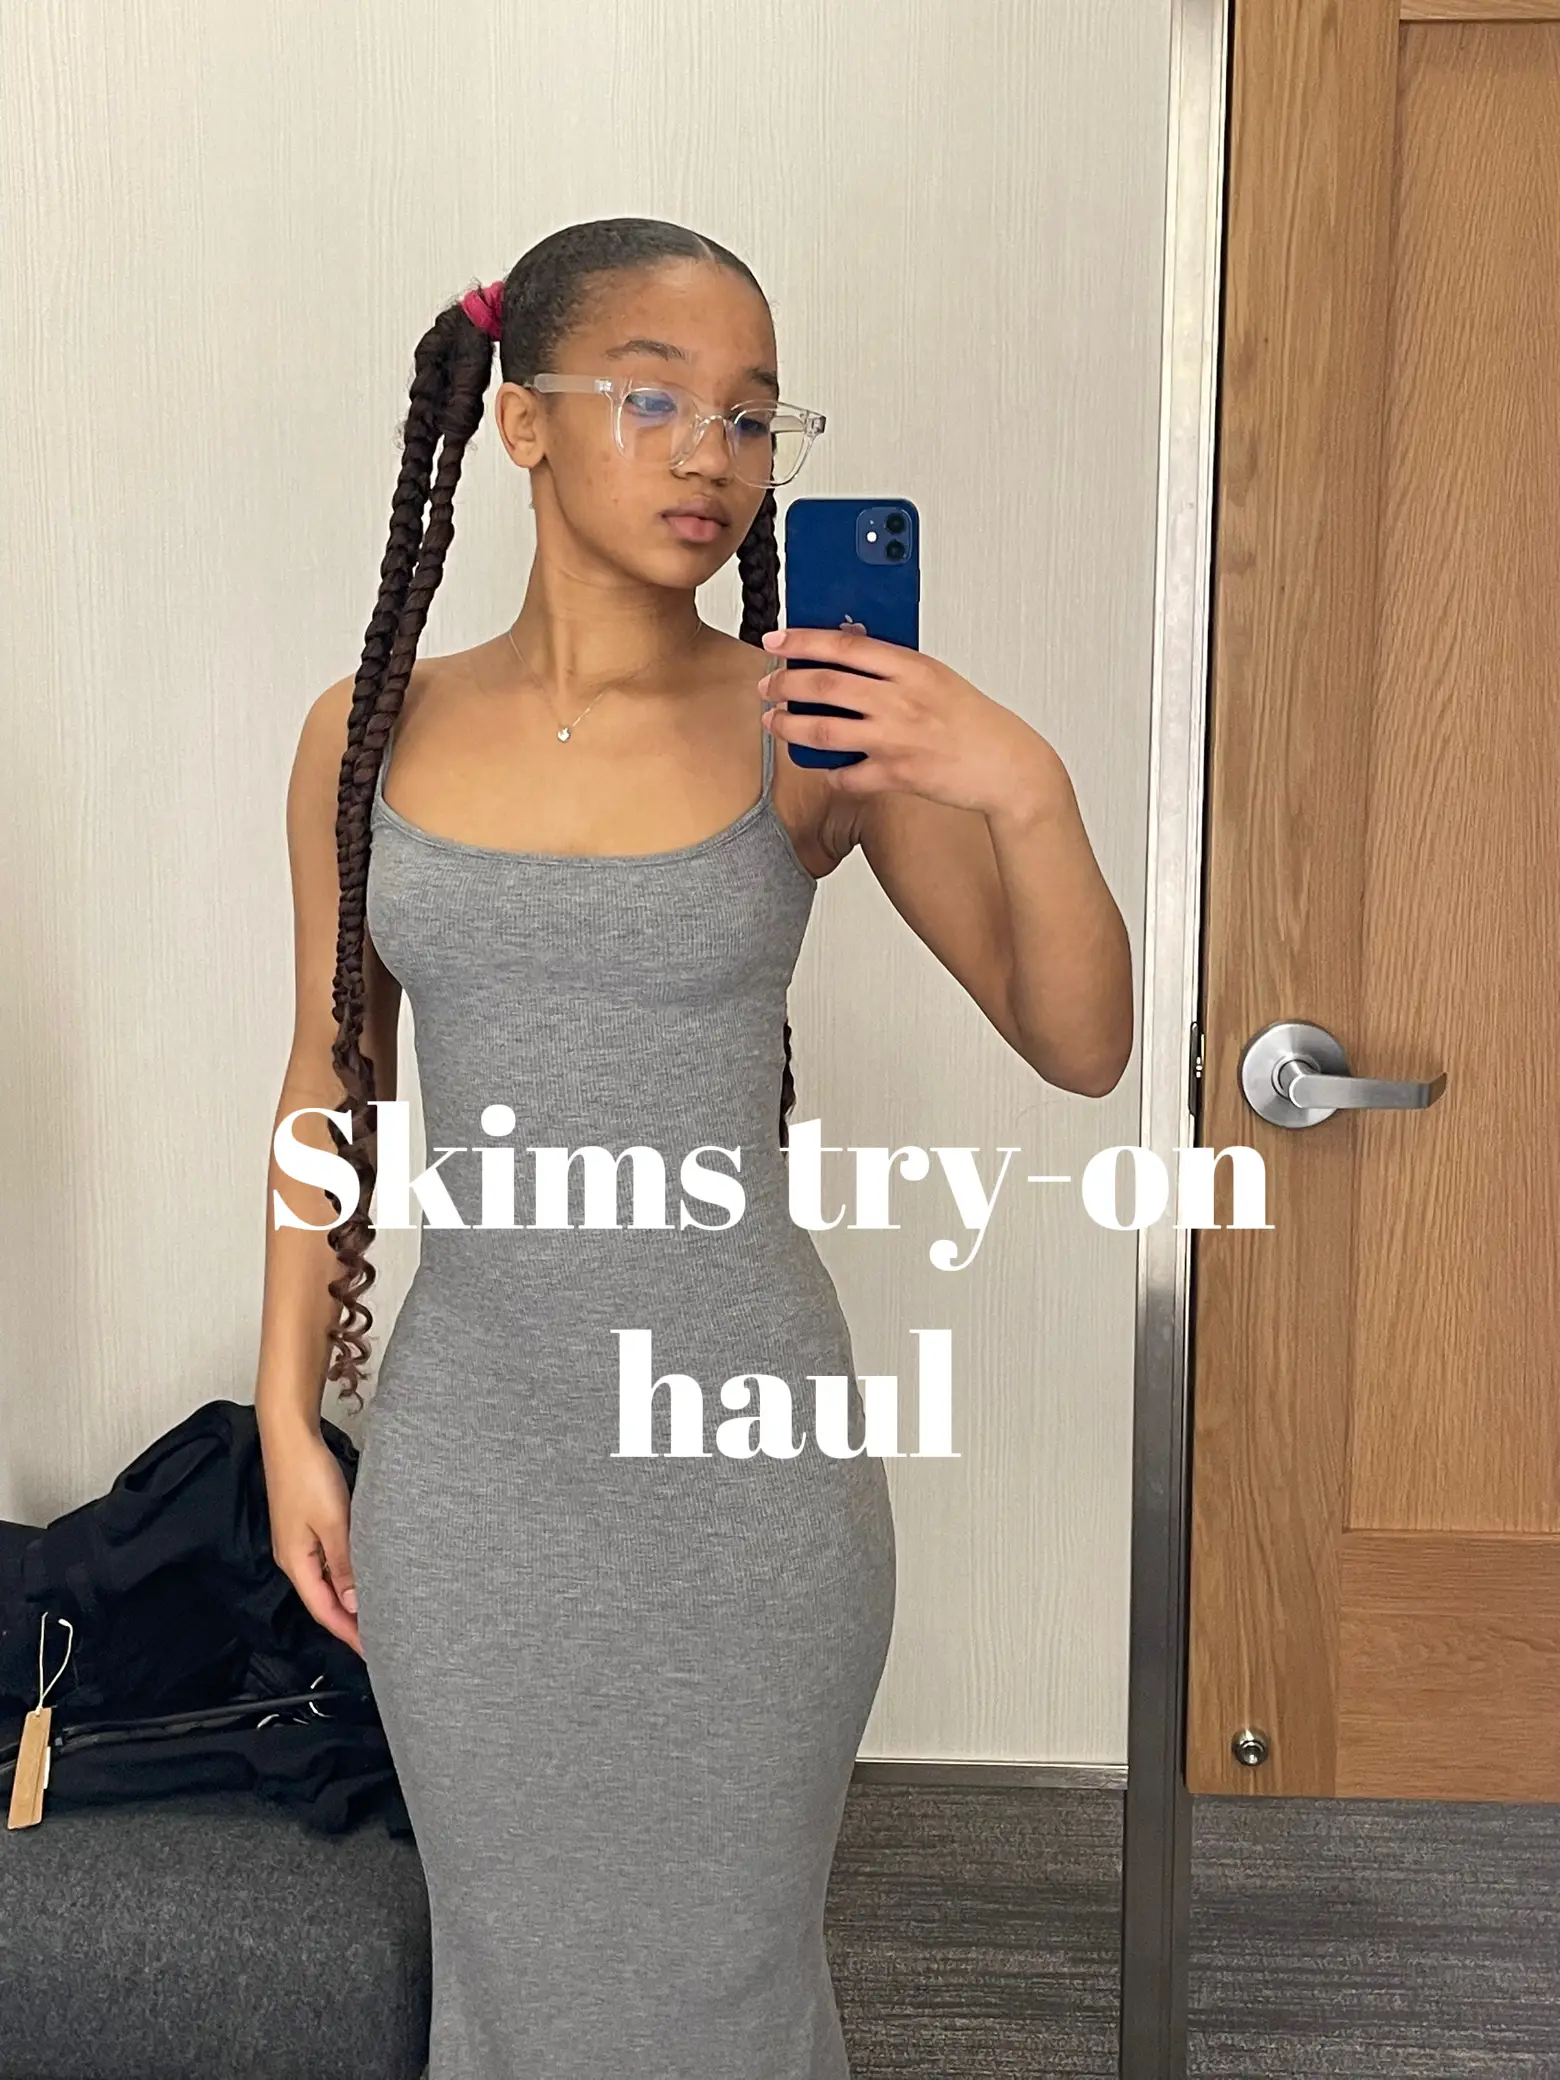 SKIMS TRY-ON HAUL  is it worth the hype? 🤔 